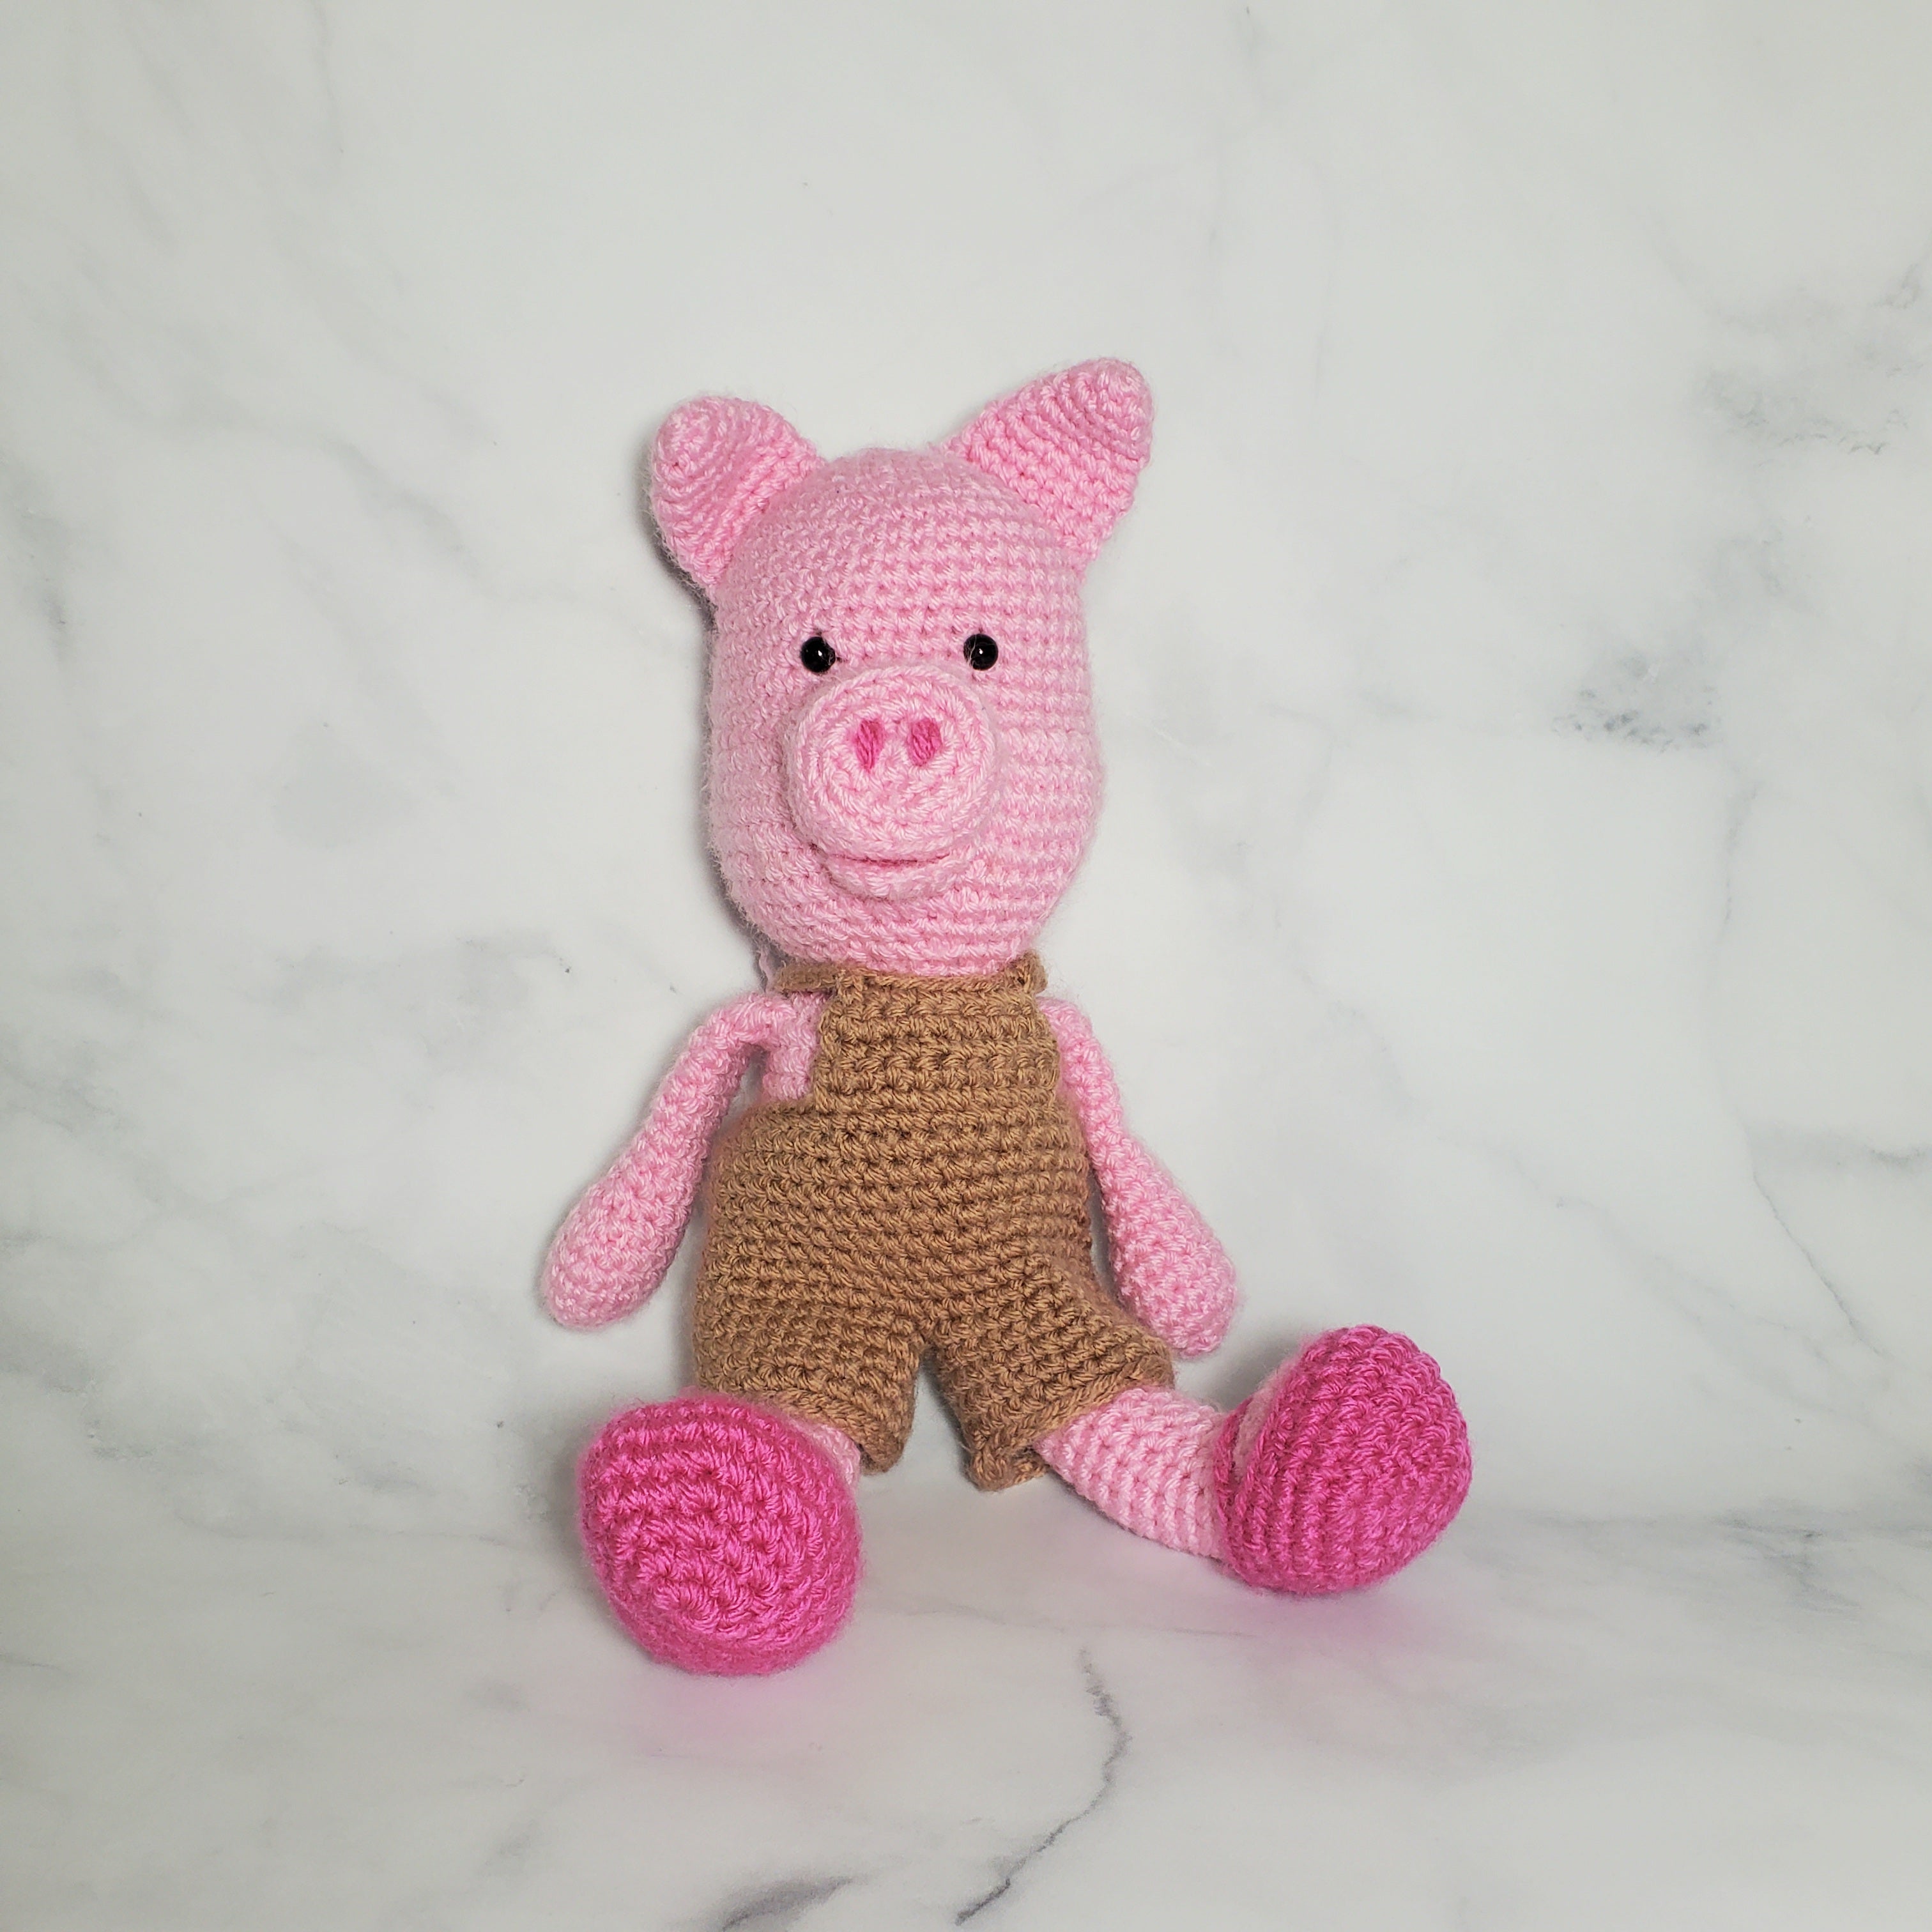 Pink Piggie Plush Toy - 13 Inches